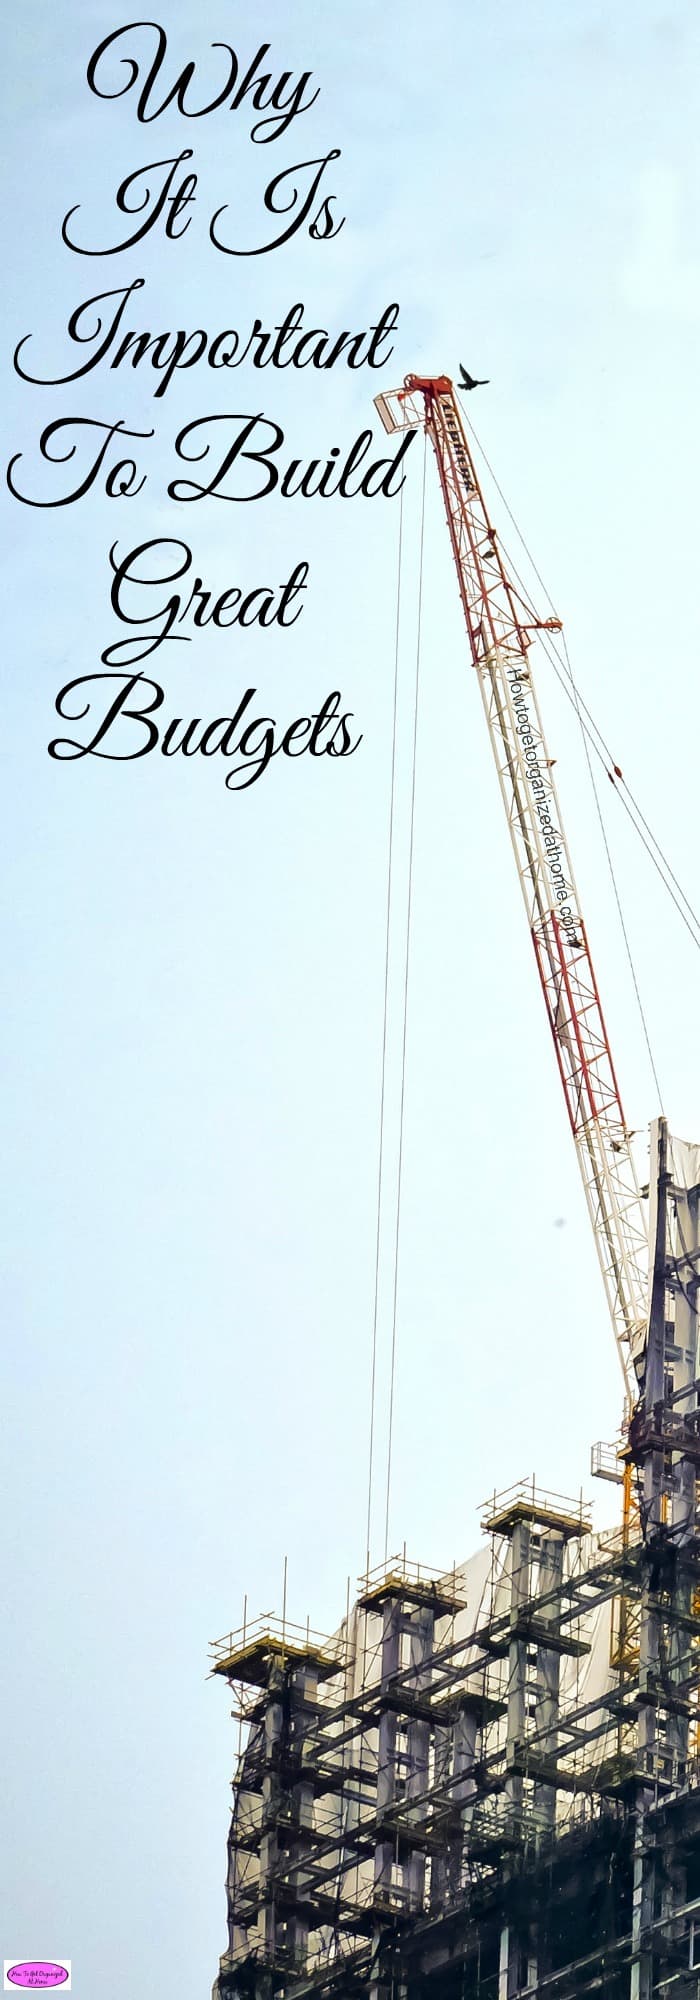 While building great budgets might seem a difficult task, it is the most important financial task that you should do every month.